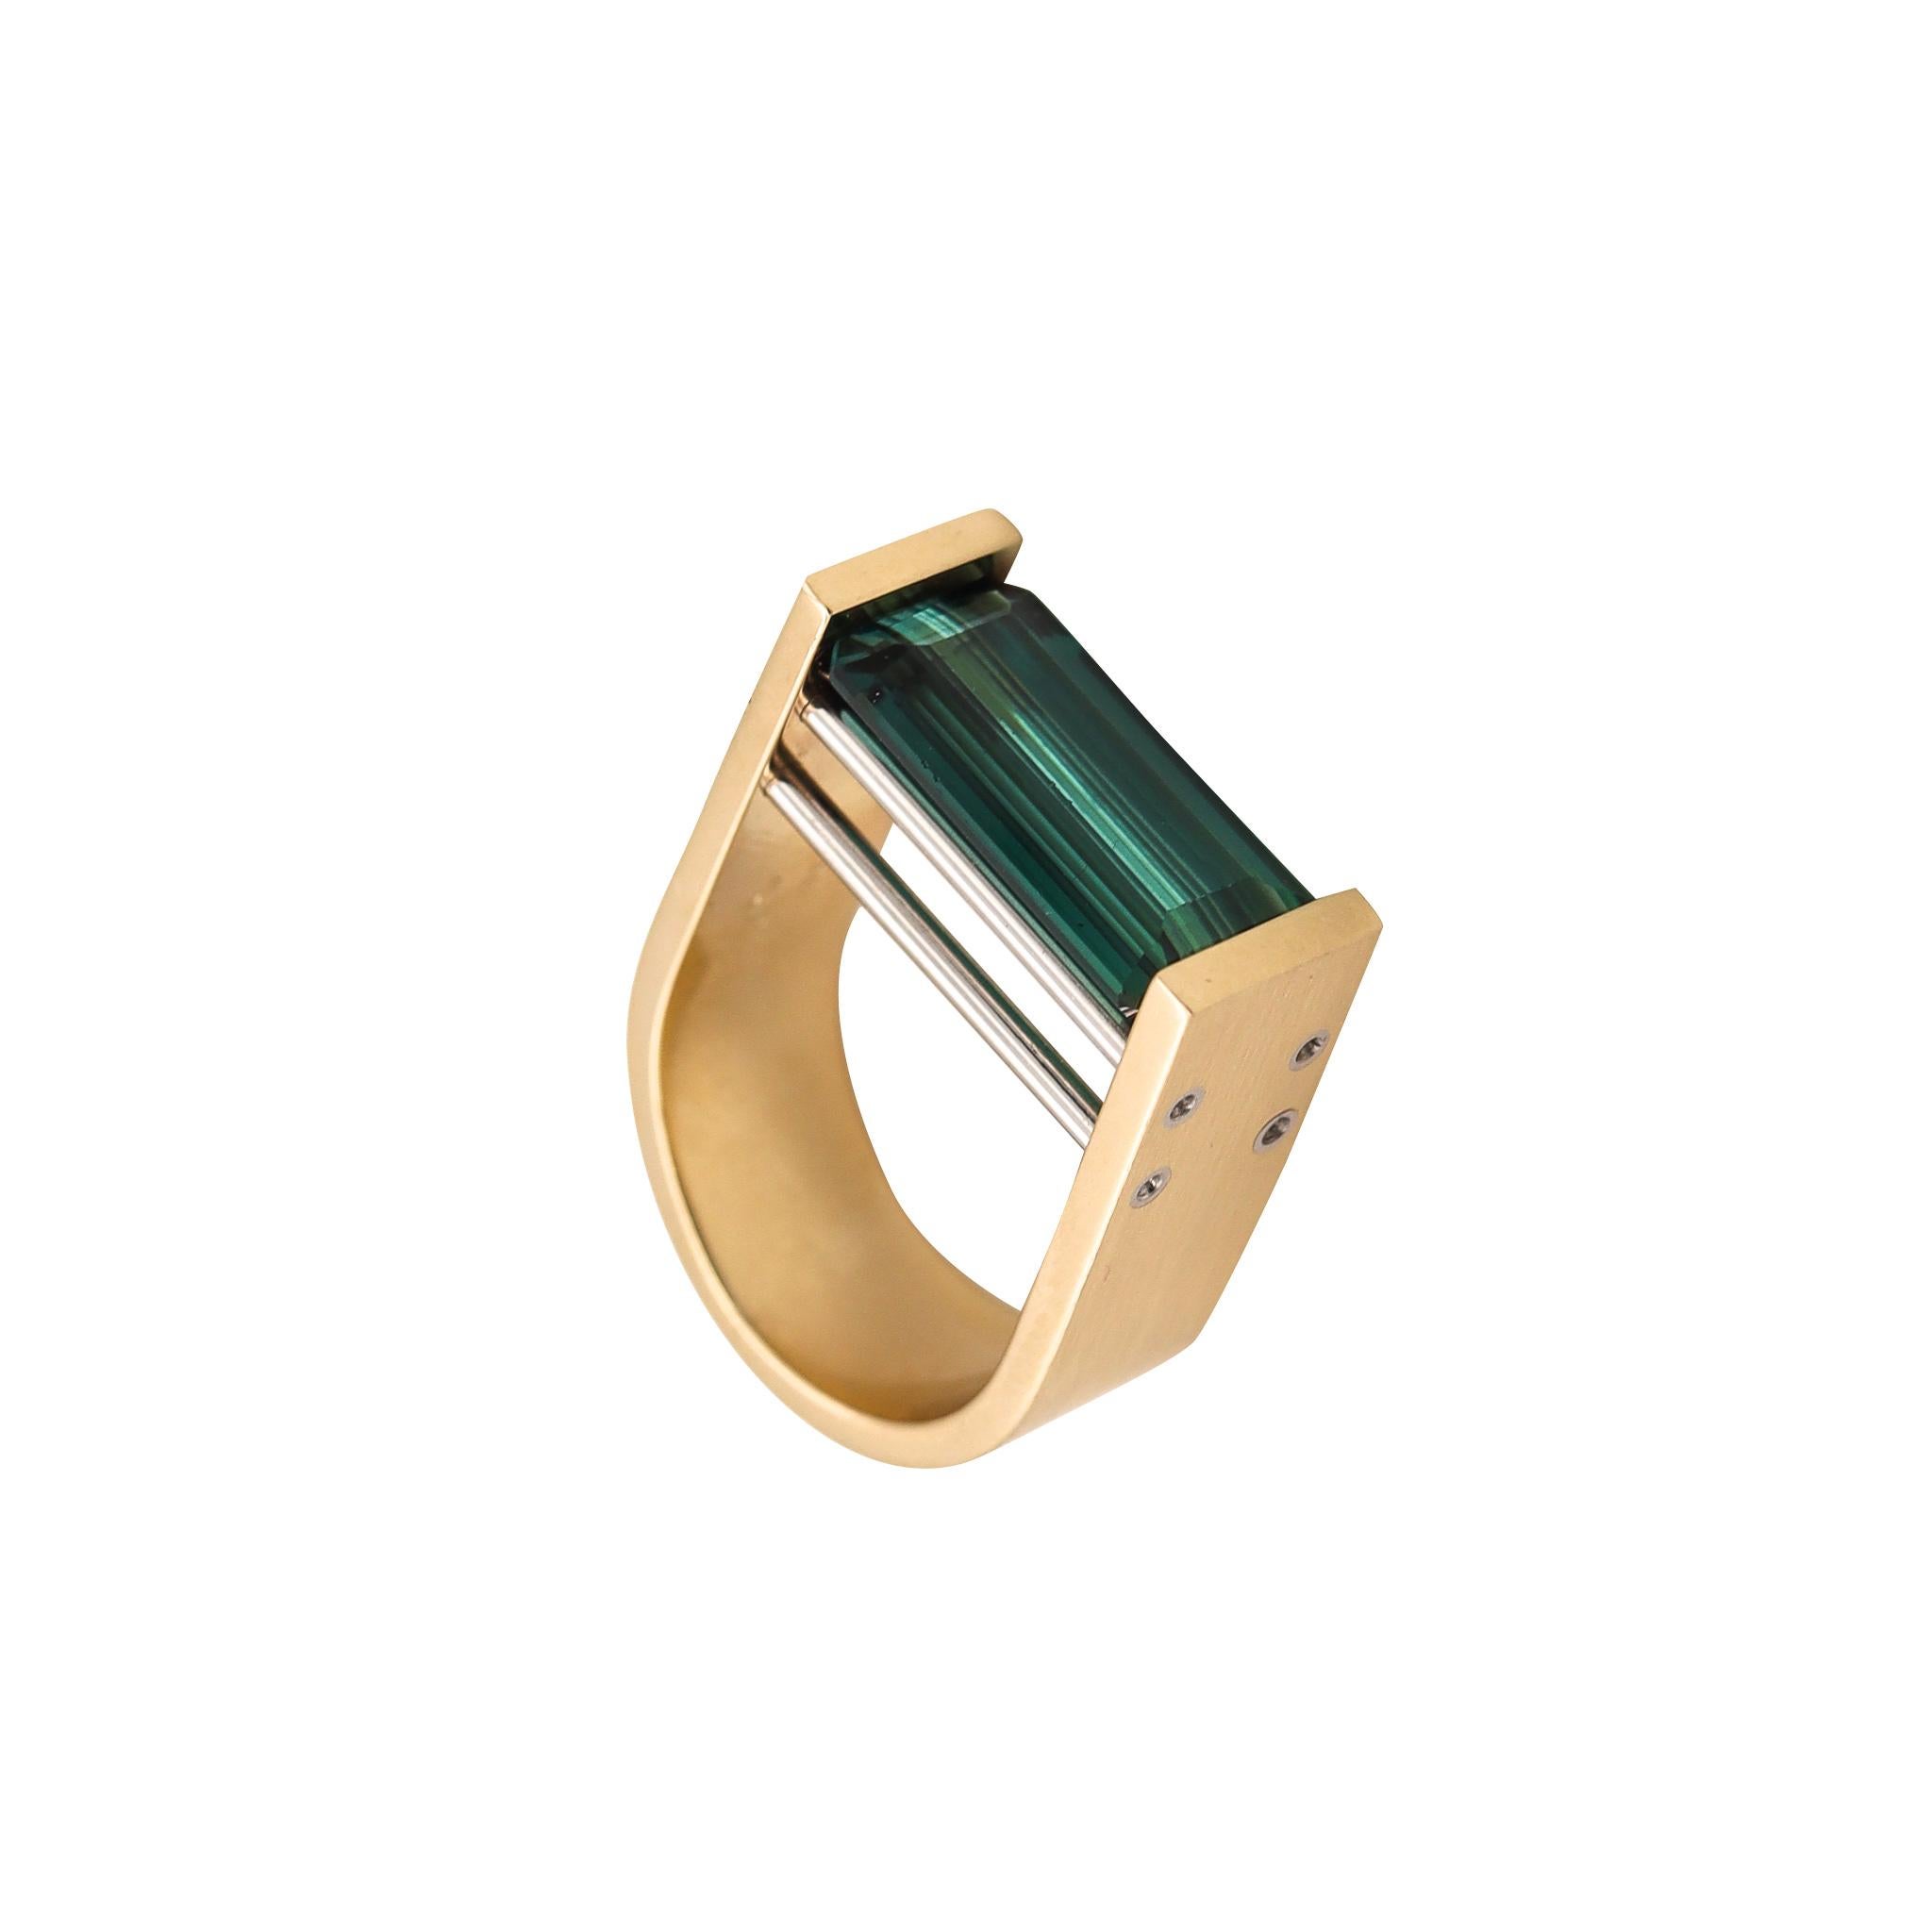 Geometric Sculptural Bauhaus Ring With a Blue Tourmaline.

Beautiful sculptural piece made in northern Europe, most probably Germany or Switzerland. This sleek one-of-a-kind minimalist ring was crafted with Bauhaus patterns in solid yellow gold of